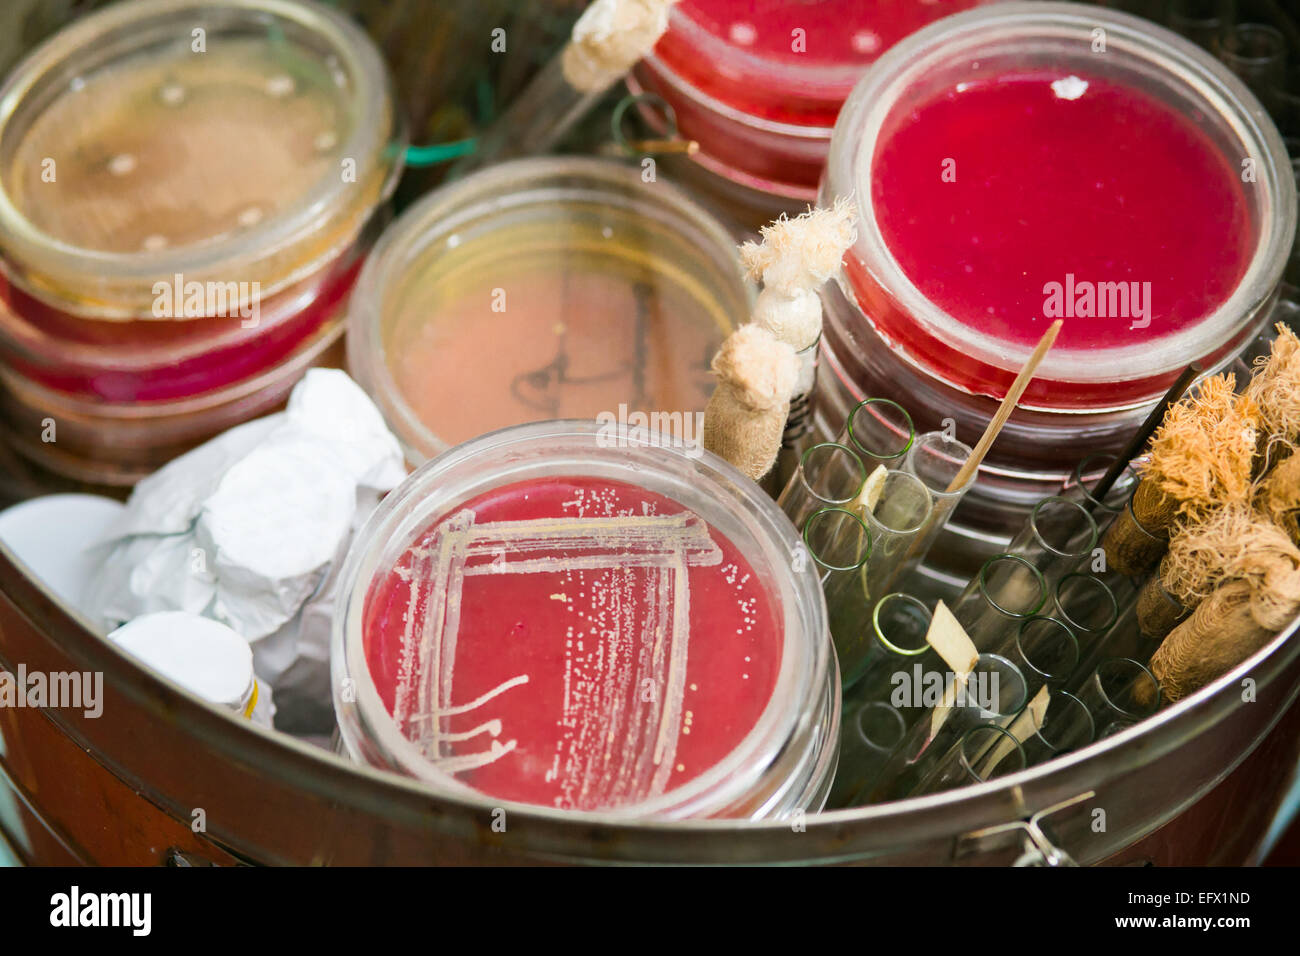 Petri dishes and test tubes stacked in metal container Stock Photo